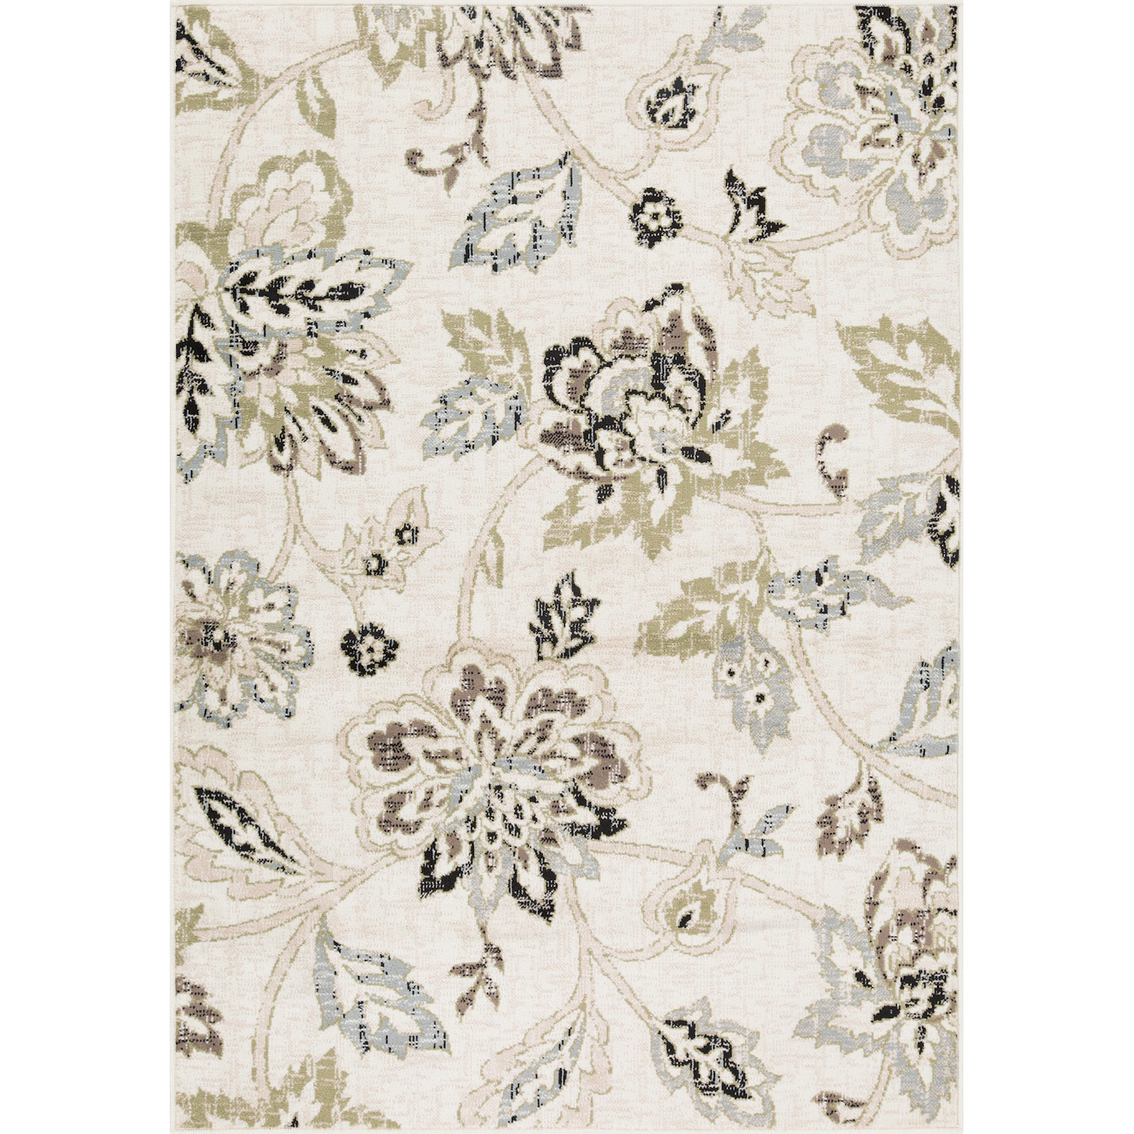 L'Baiet Maya Green Floral Area Rug - Image 1 of 4